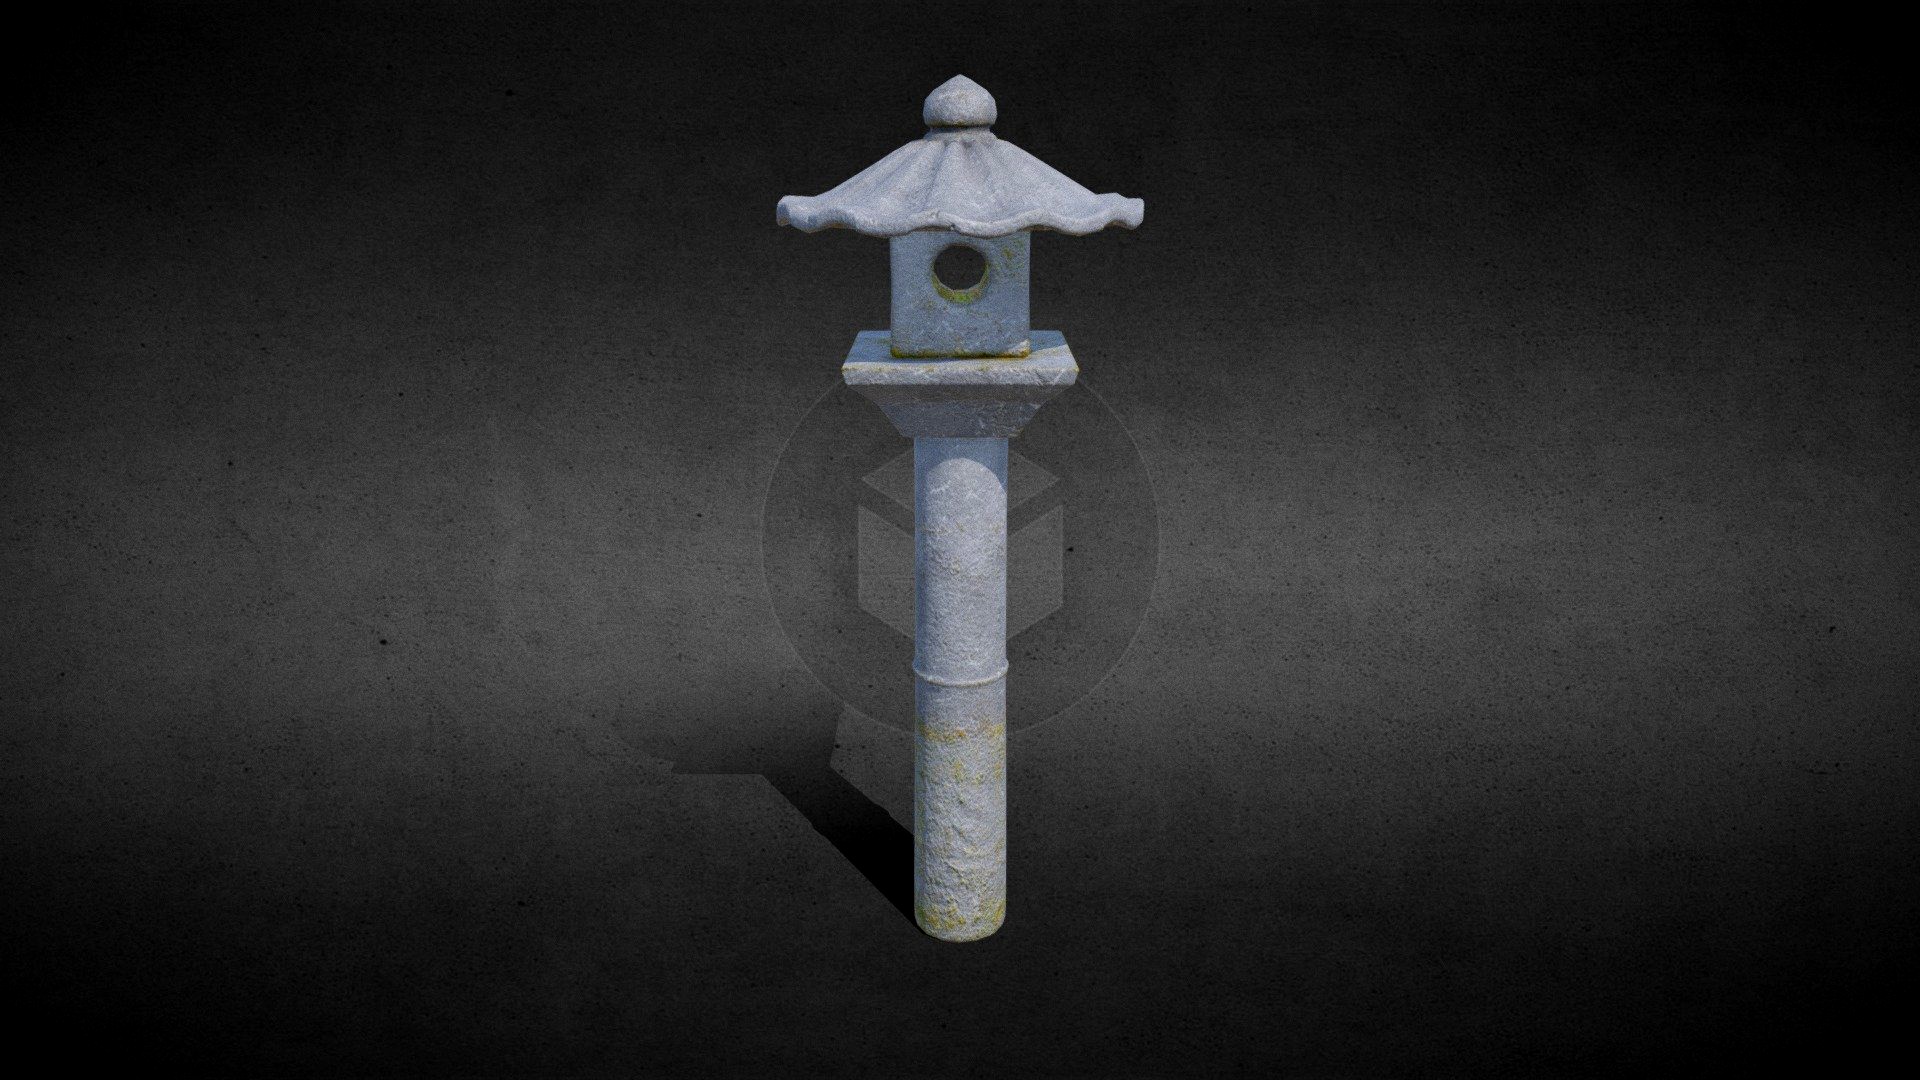 Japanese Stone Candle 7 - Game Ready - Low poly